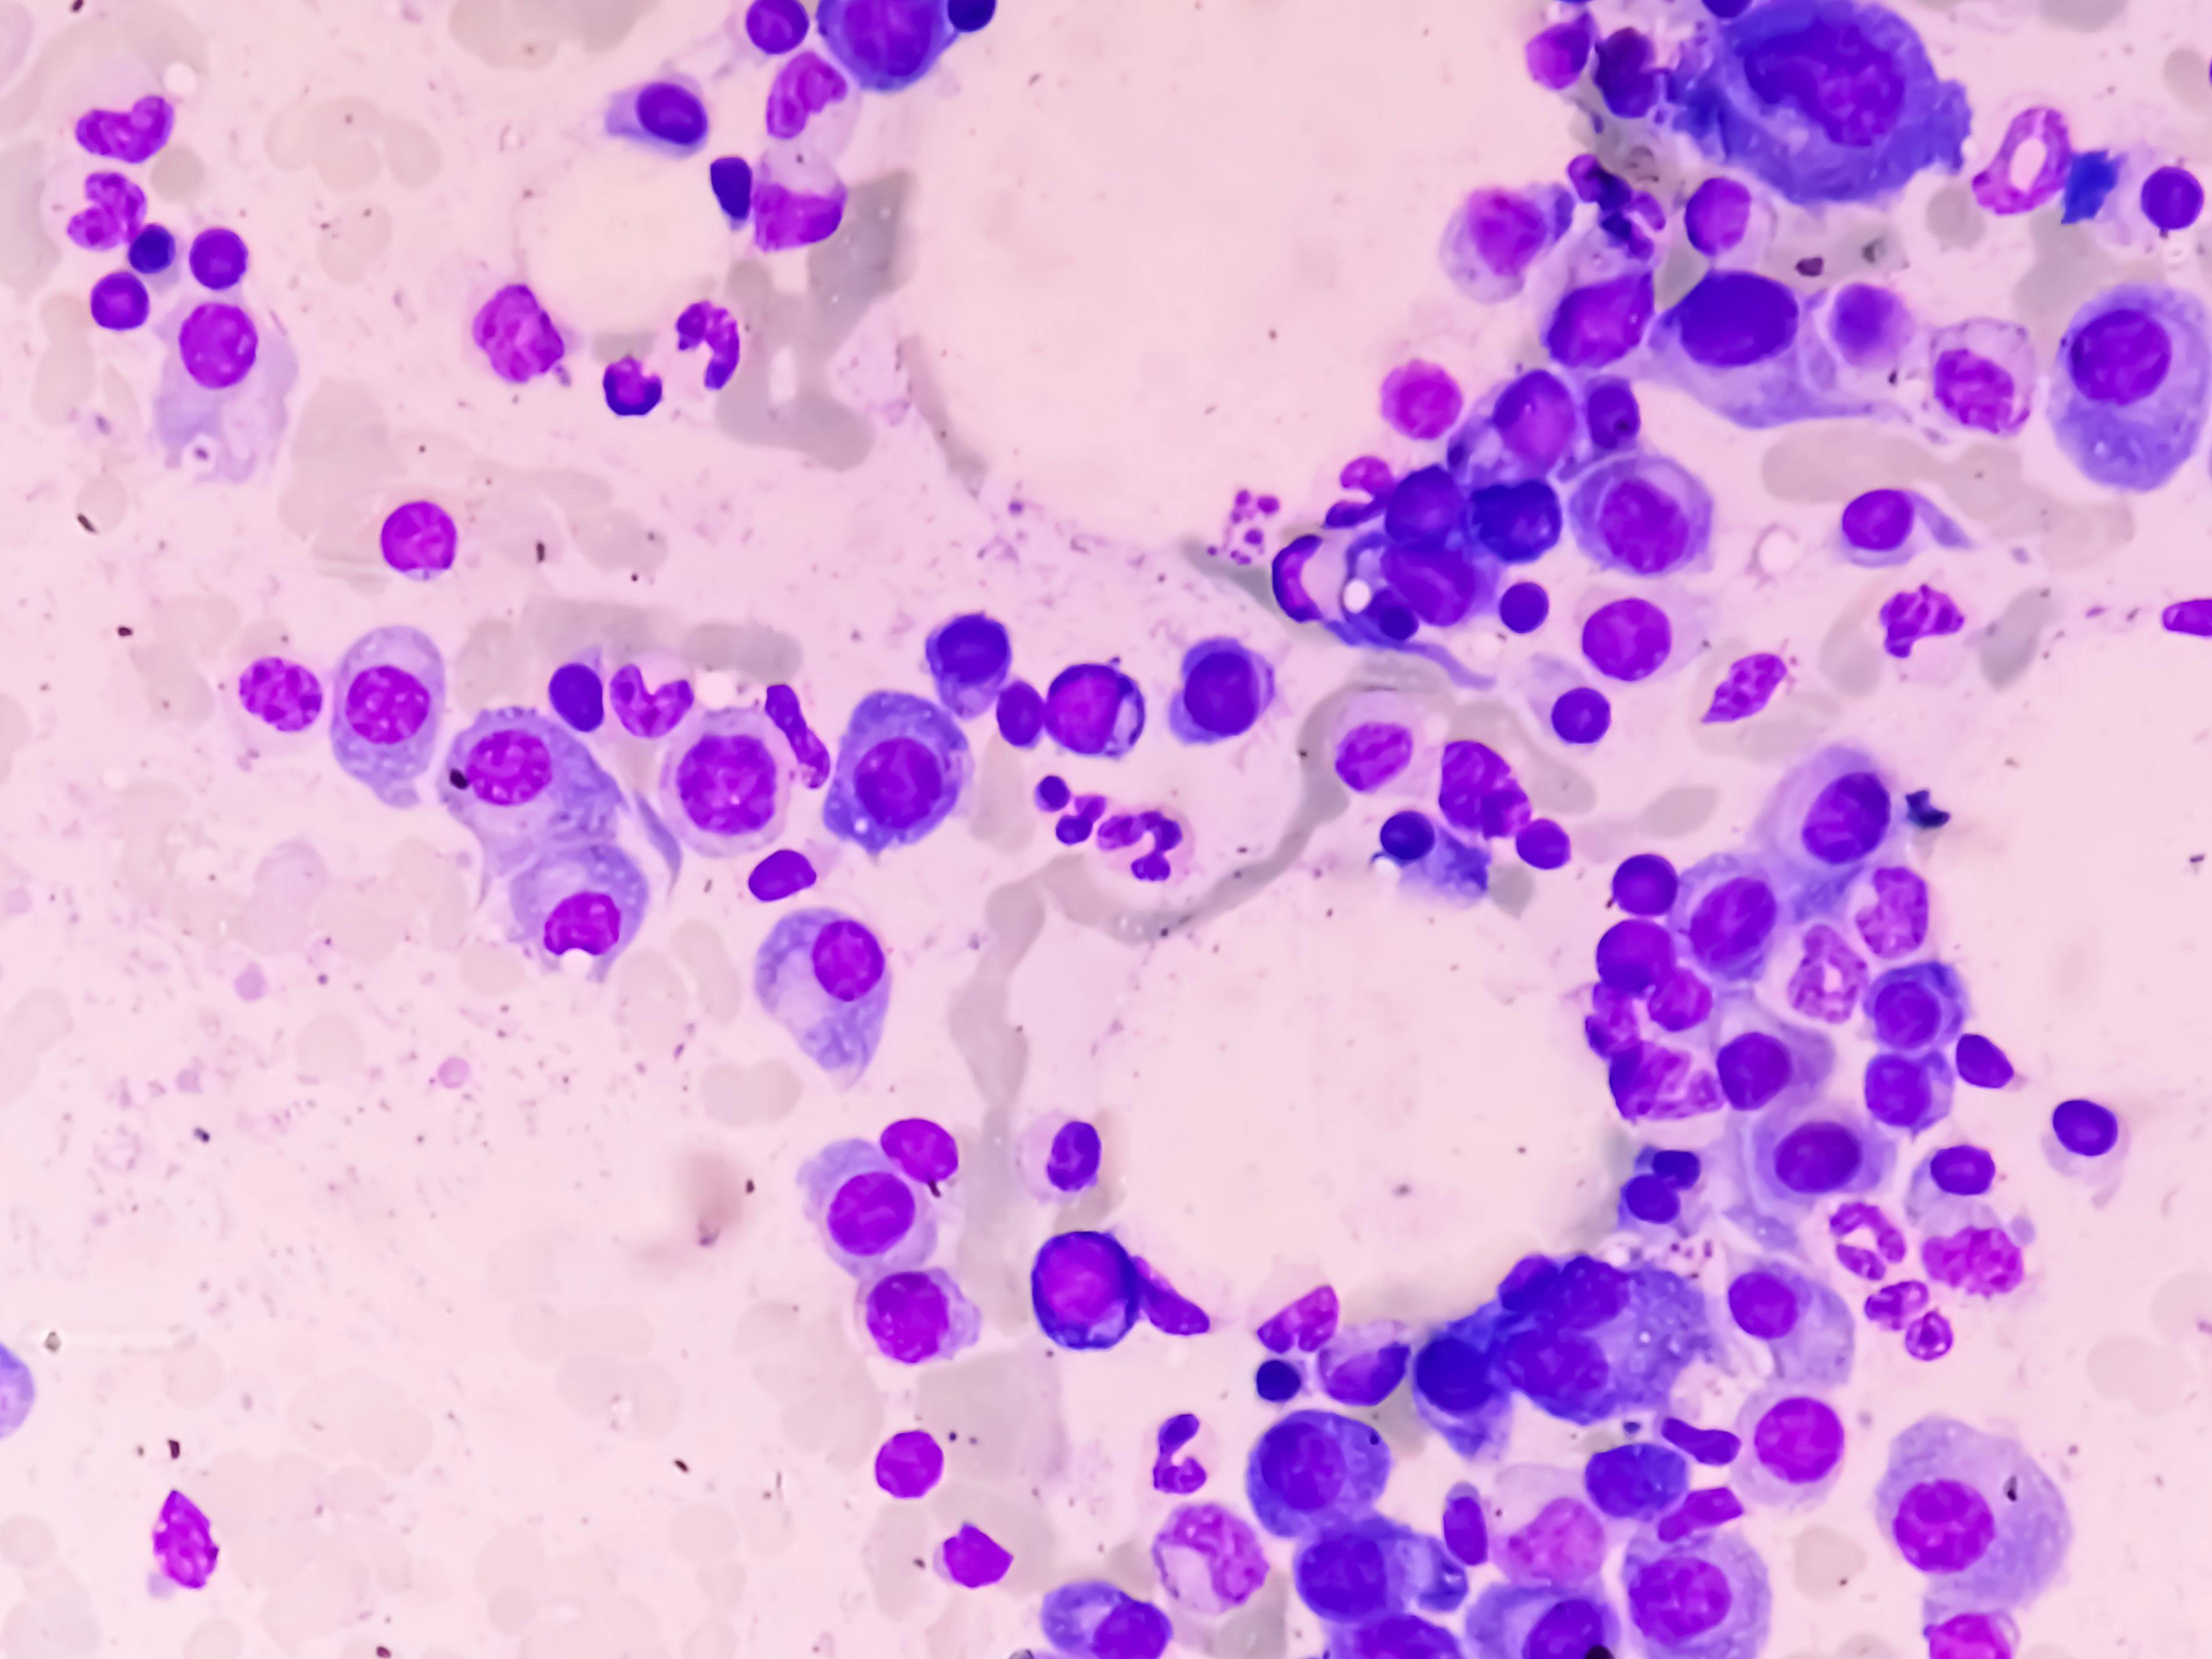 Image credit: Saiful52 | stock.adobe.com. Microscopic view of bone marrow slide feature are suggestive Multiple myeloma, also known as myeloma, is a type of bone marrow cancer.